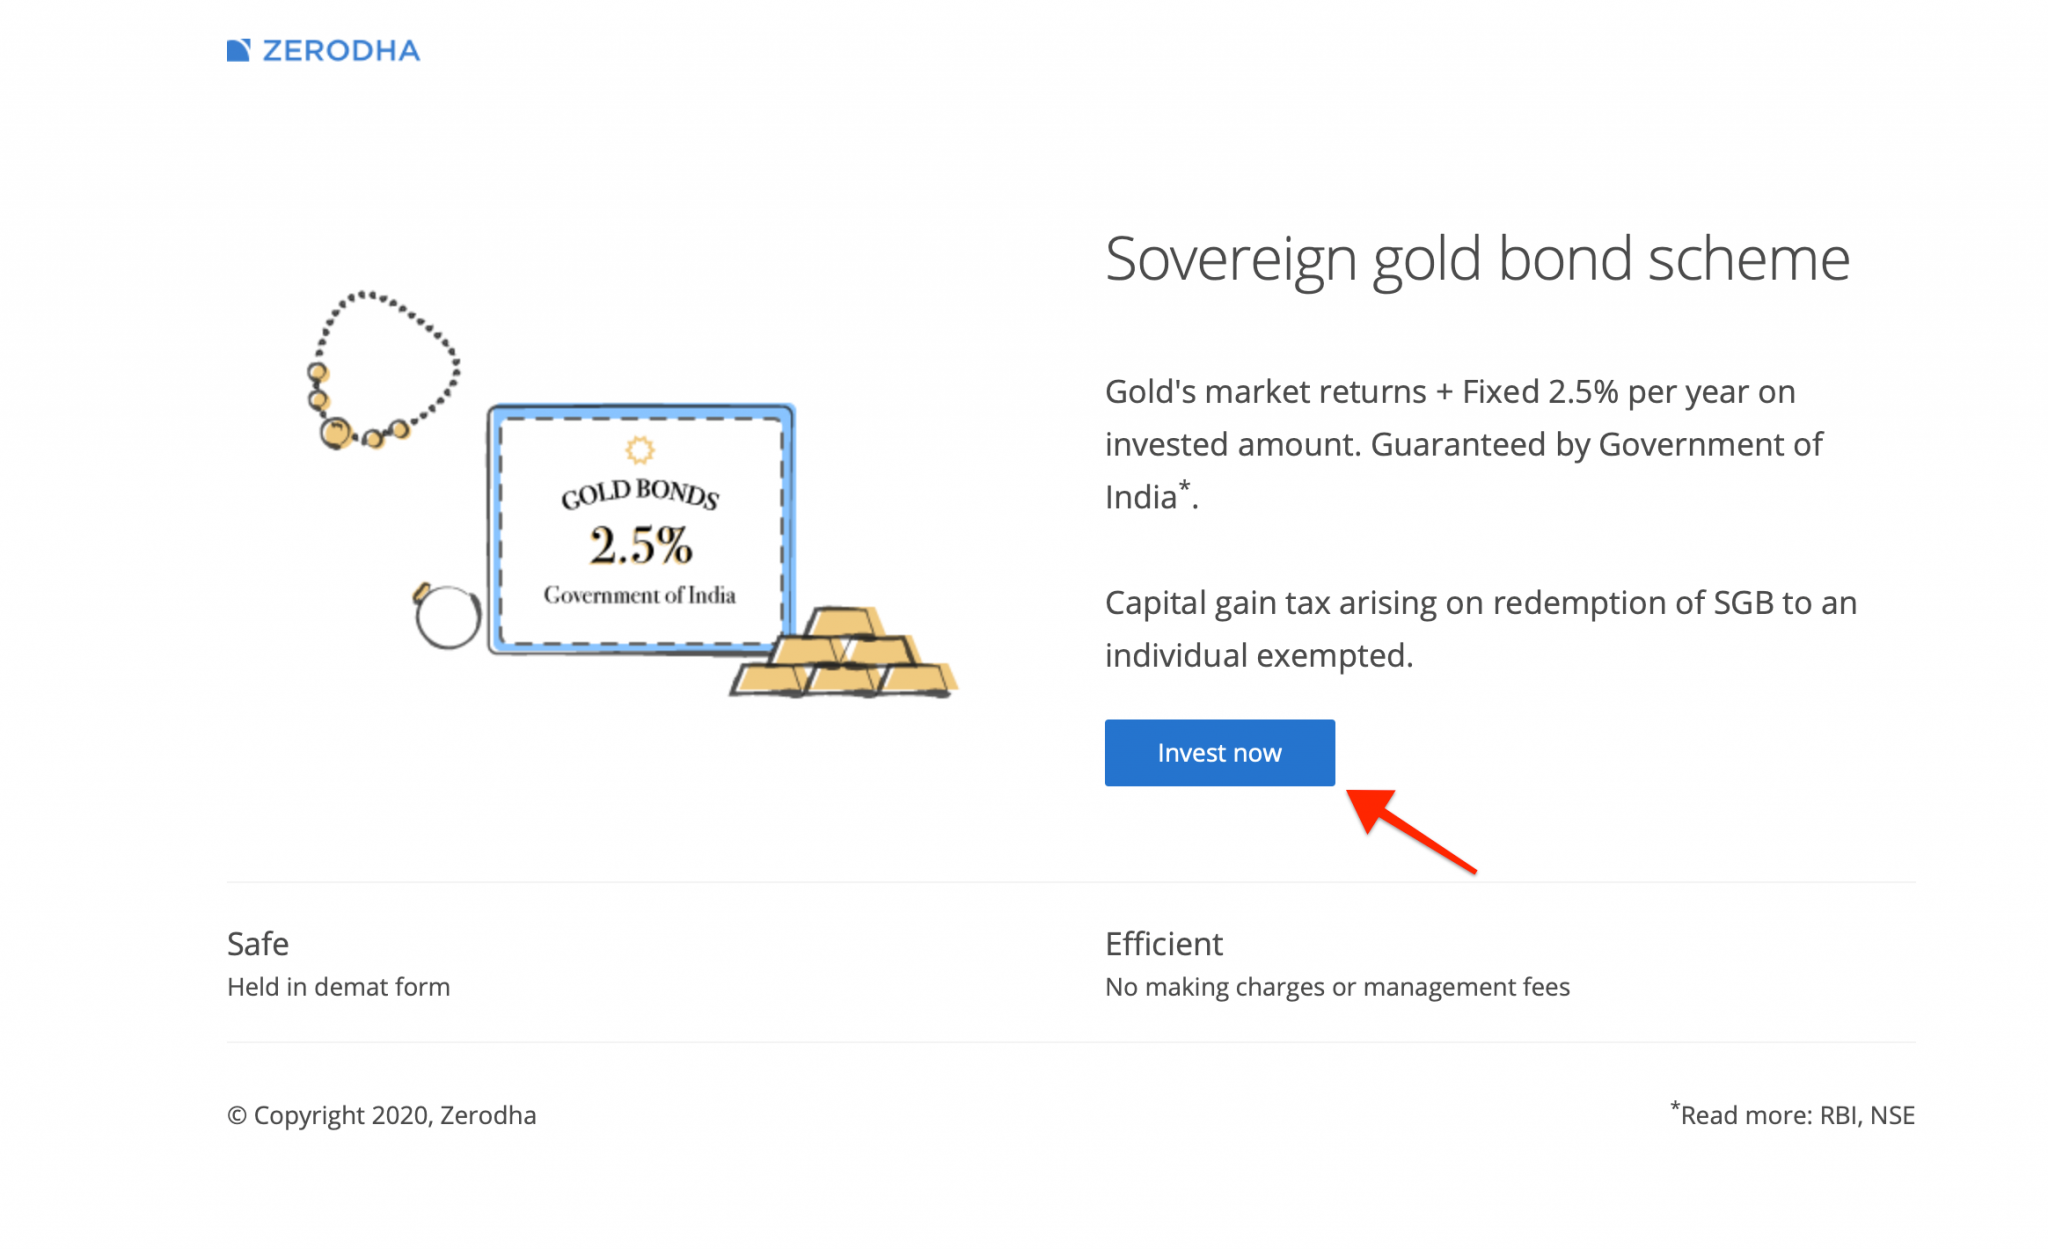 How To Buy Sovereign Gold Bond With Zerodha